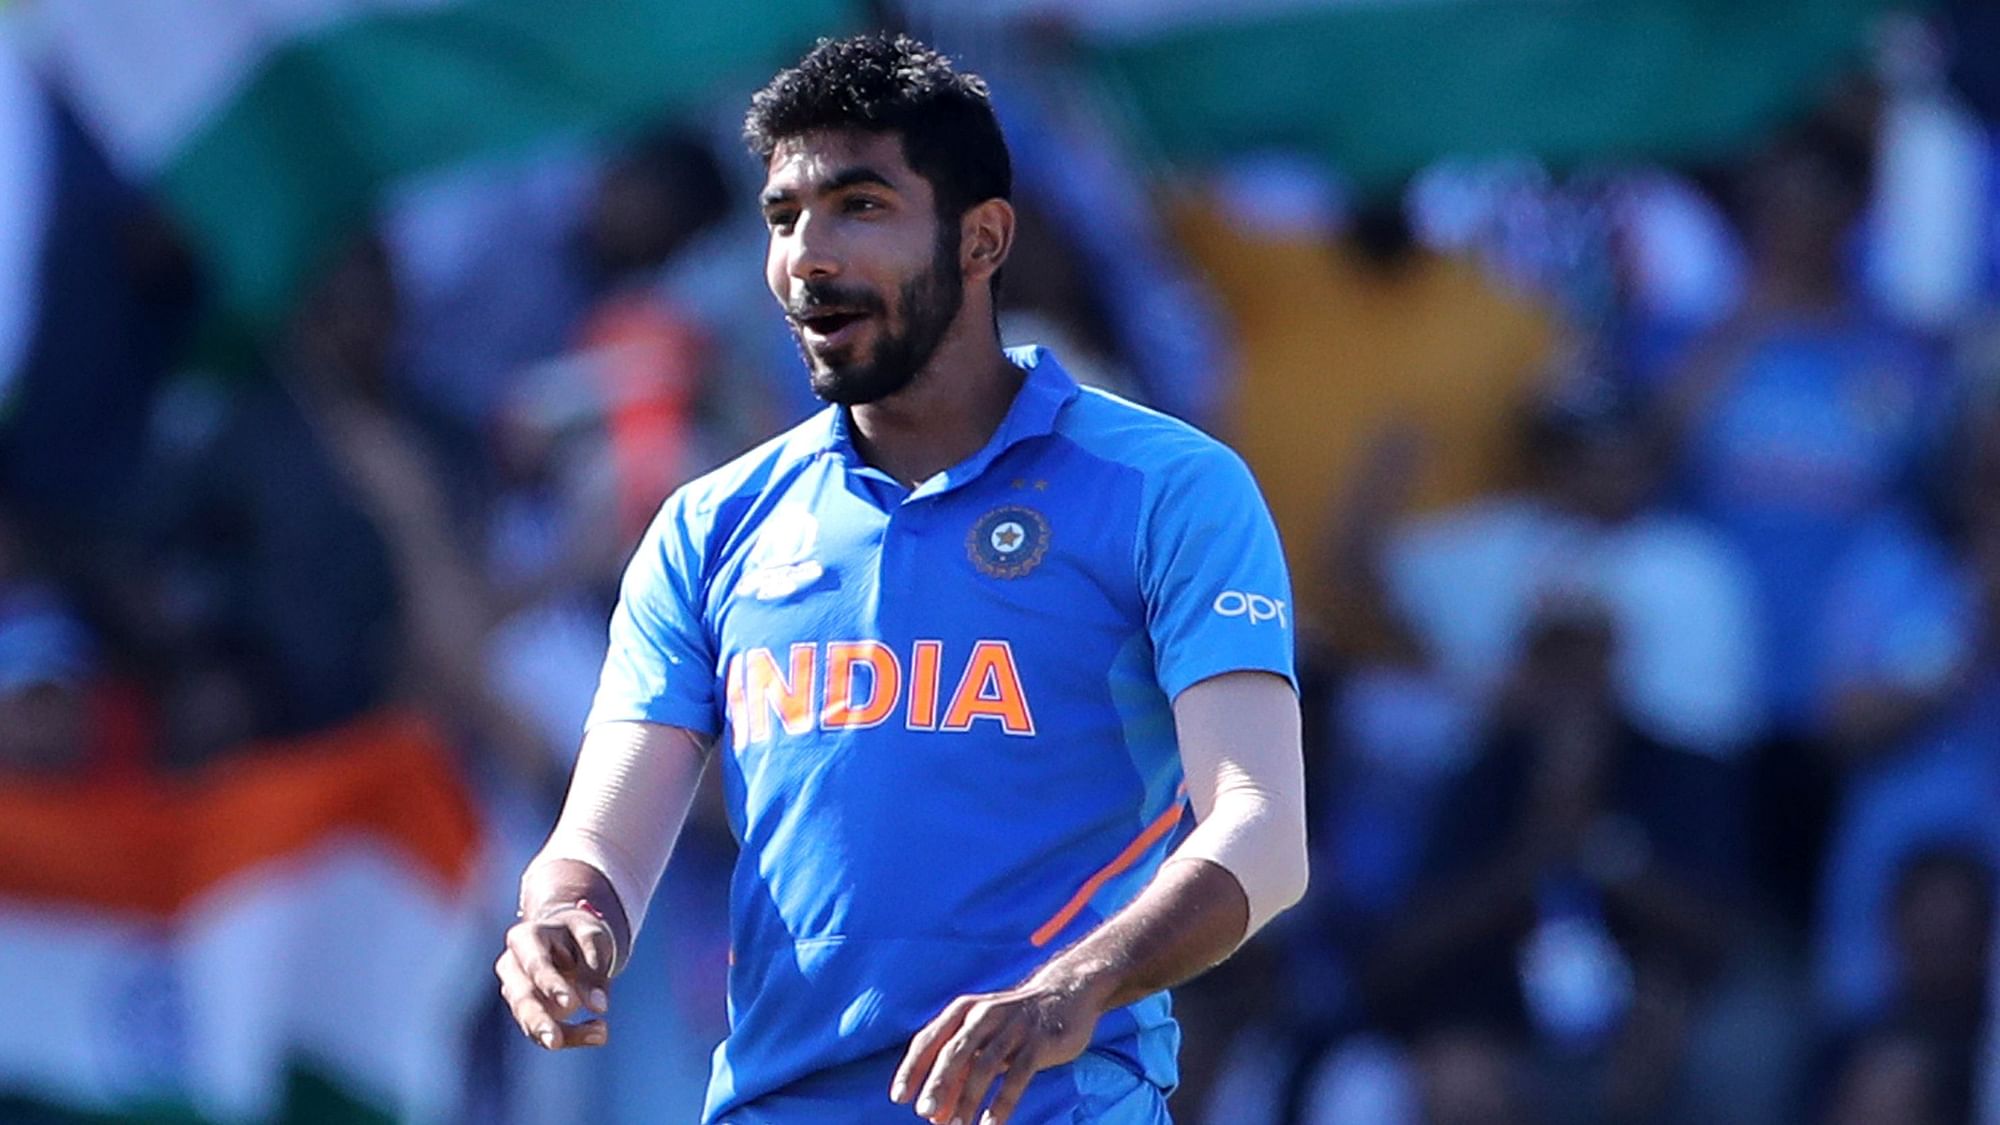 Kane Williamson lauded Jasprit Bumrah, saying that he is always a threat with a ball in his hand.